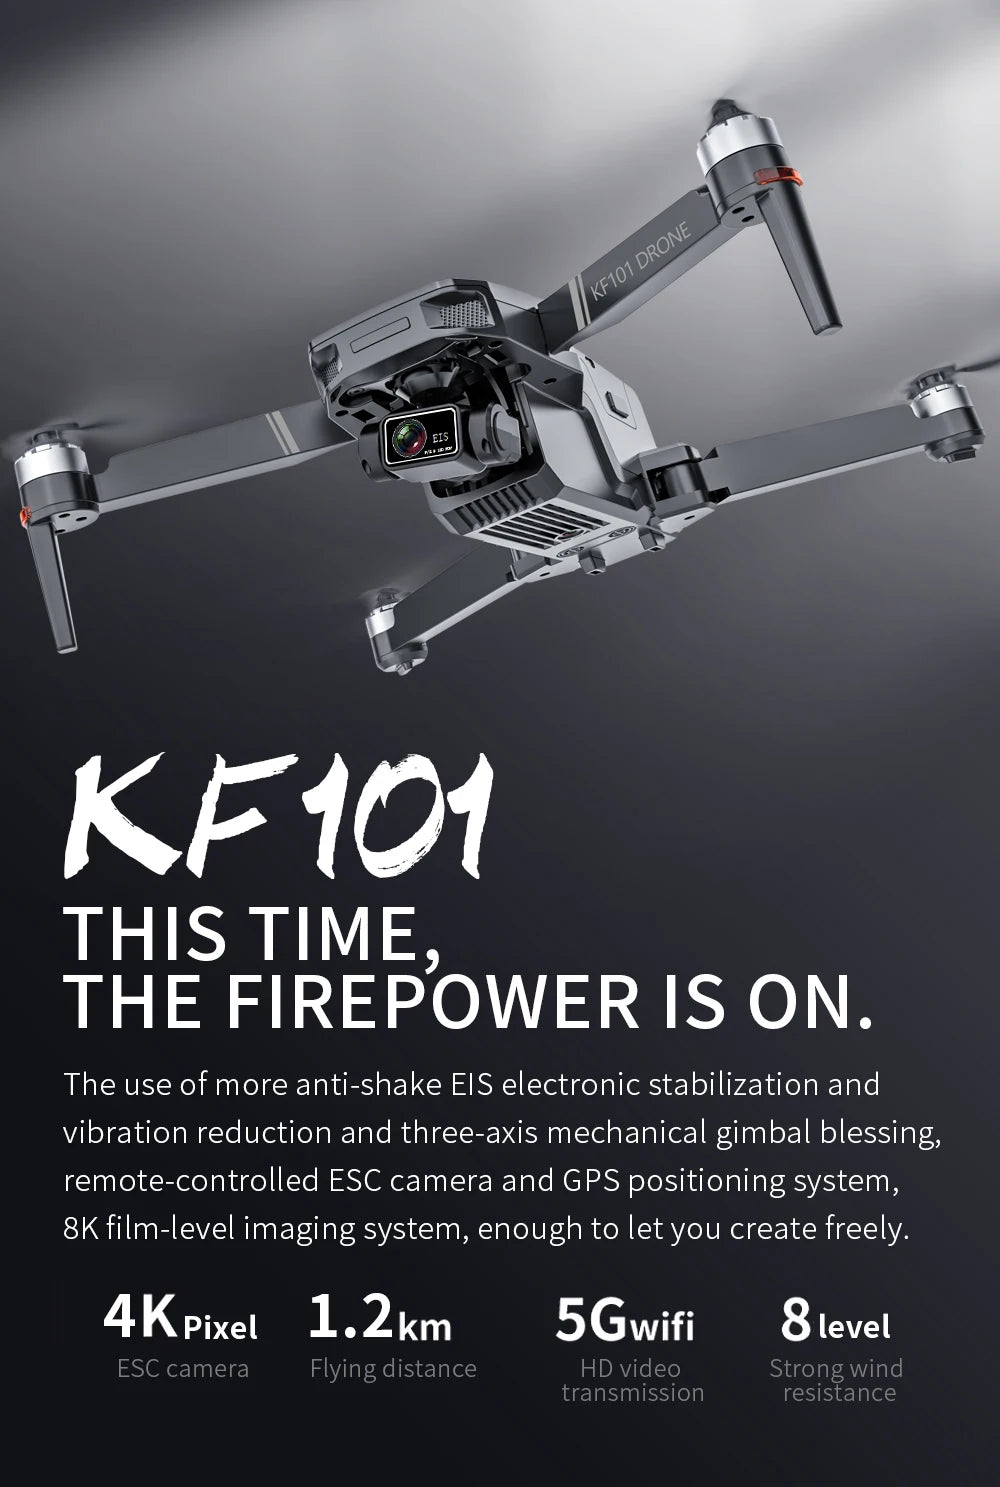 New GPS Drone, the use of more anti-shake ElS electronic stabilization and vibration reduction and three-axi